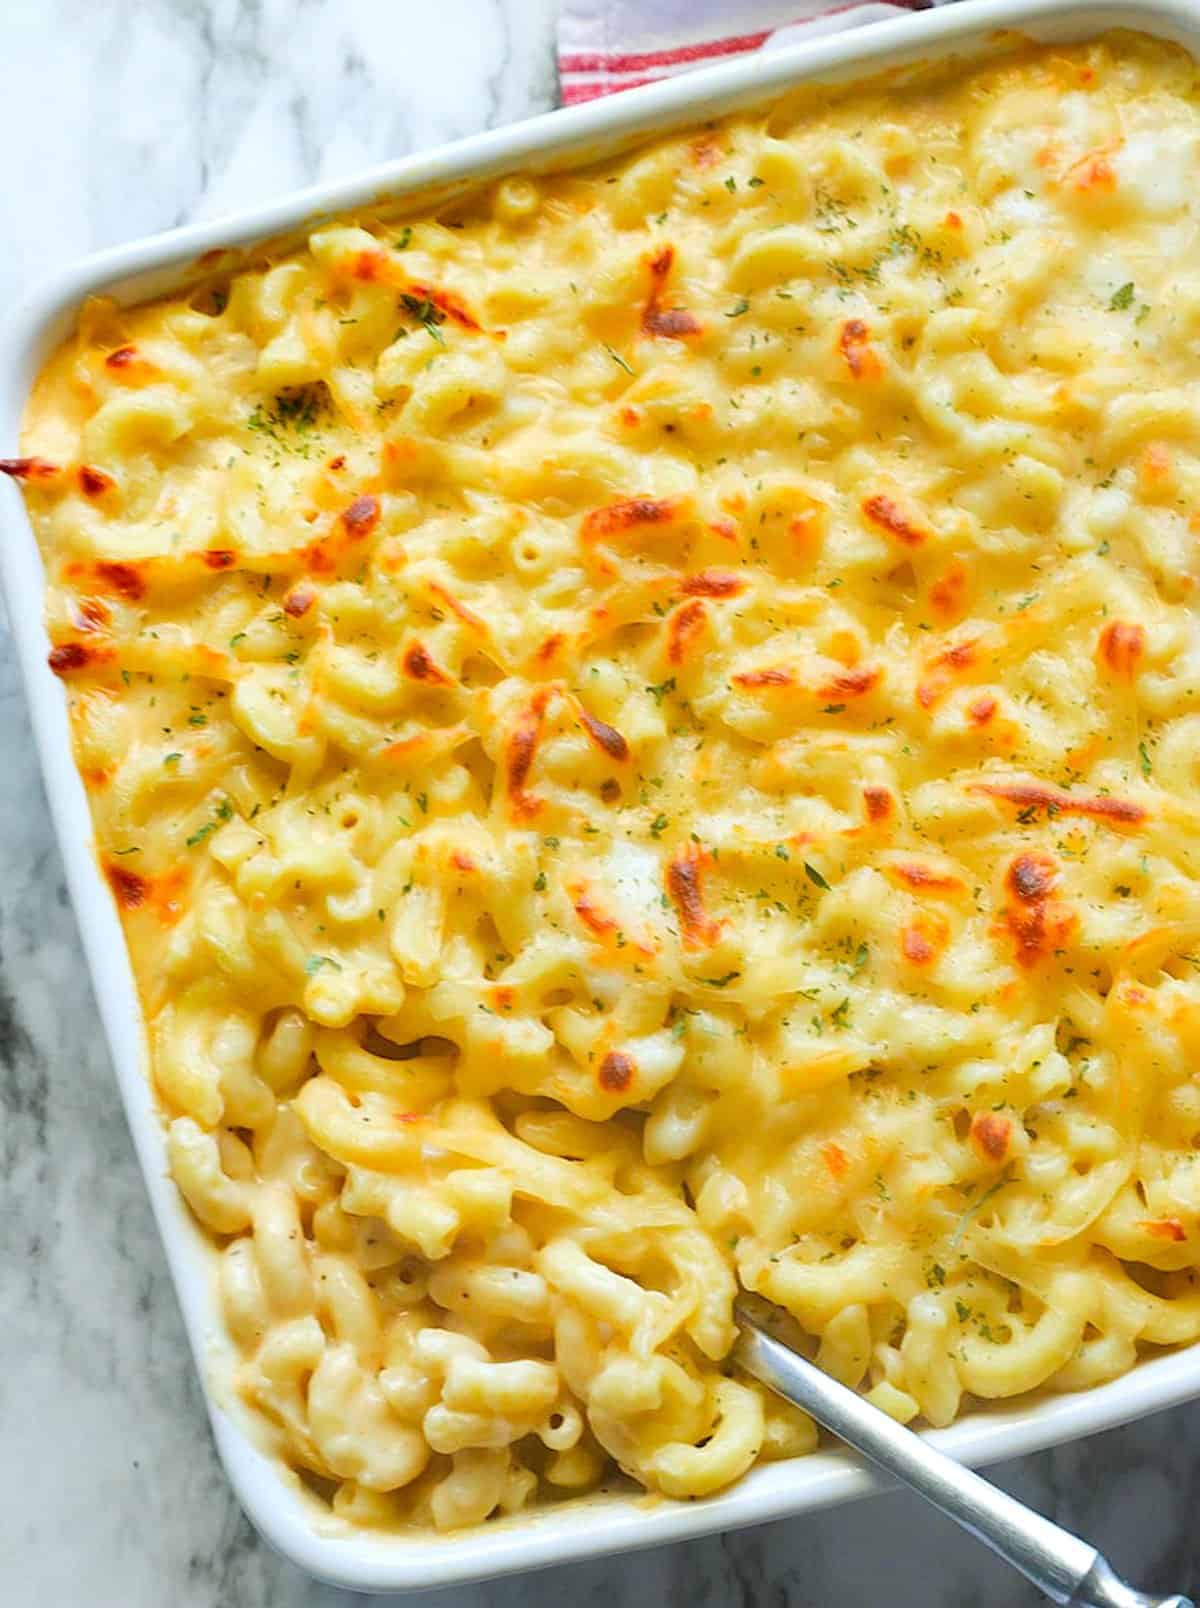 Serving up freshly baked Smoked Gouda Mac and Cheese